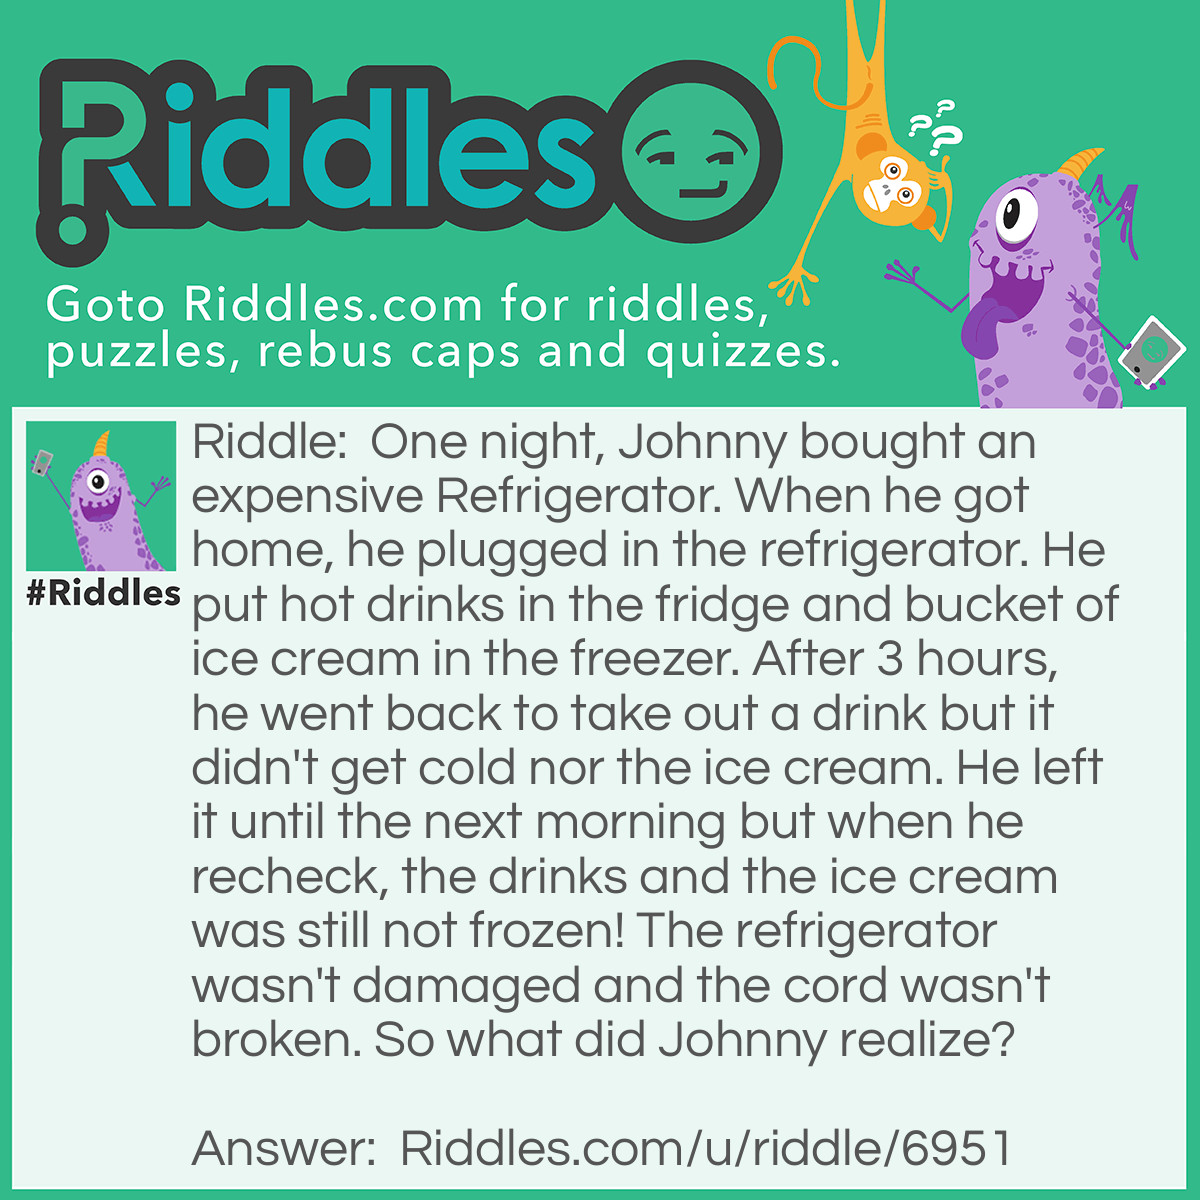 Riddle: One night, Johnny bought an expensive Refrigerator. When he got home, he plugged in the refrigerator. He put hot drinks in the fridge and bucket of ice cream in the freezer. After 3 hours, he went back to take out a drink but it didn't get cold nor the ice cream. He left it until the next morning but when he recheck, the drinks and the ice cream was still not frozen! The refrigerator wasn't damaged and the cord wasn't broken. So what did Johnny realize? Answer: He realized that when he plugged in the refrigerator, the cord wasn't plugged to any socket so it wasn't running this whole time.